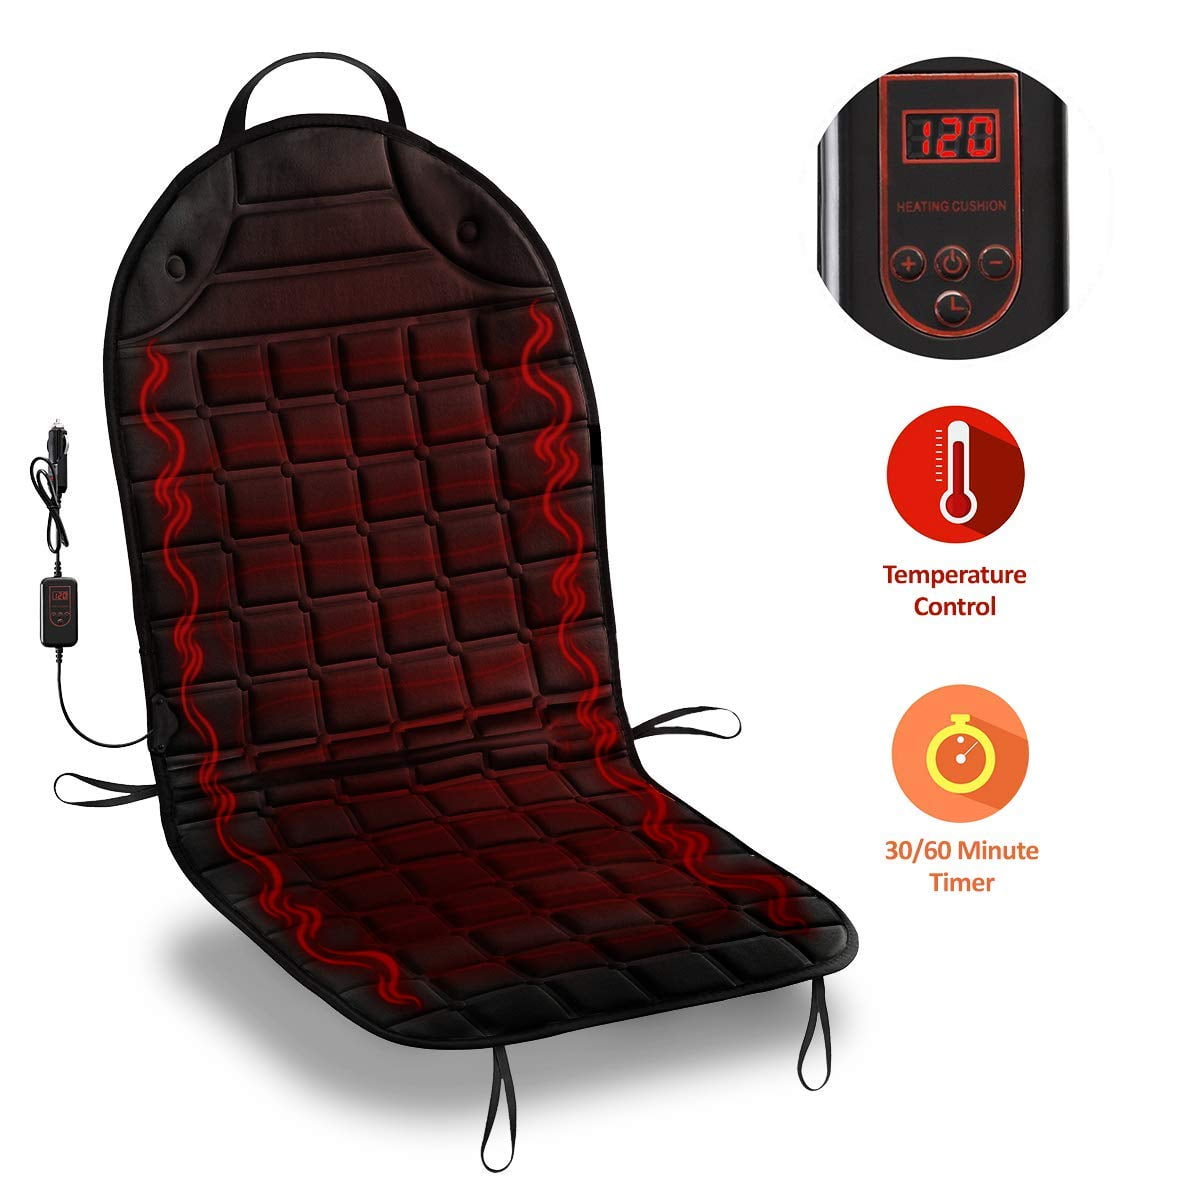 12V Heated Car Seat Cushion Anti-slipping Cover Adjustable Warmer Winter Cushion Universal for Most Car Main Driver Seat Winbang Heated Seat 